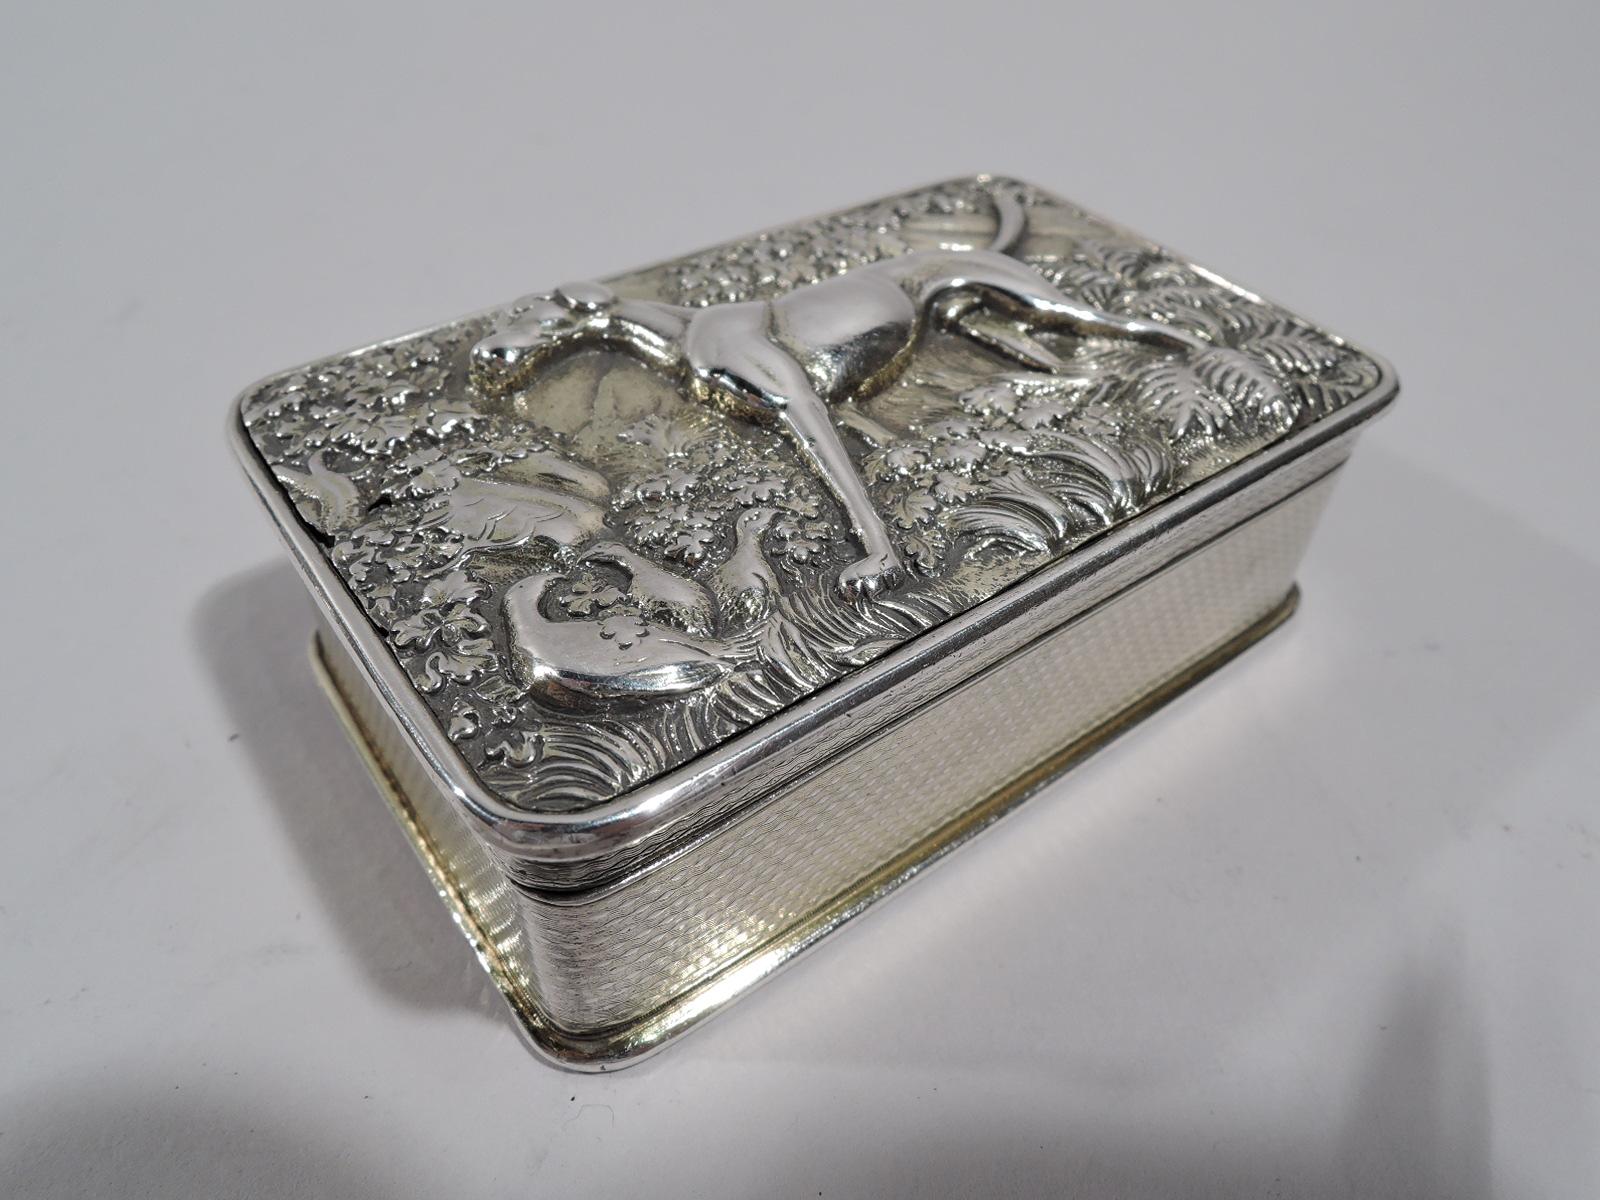 George III English sterling silver snuffbox, 1819. Rectangular with straight engine-turned sides and curved corners; underside also engine-turned. Cover hinged with low-relief hound standing alert amidst verdure, a few gamebirds tucked away in a